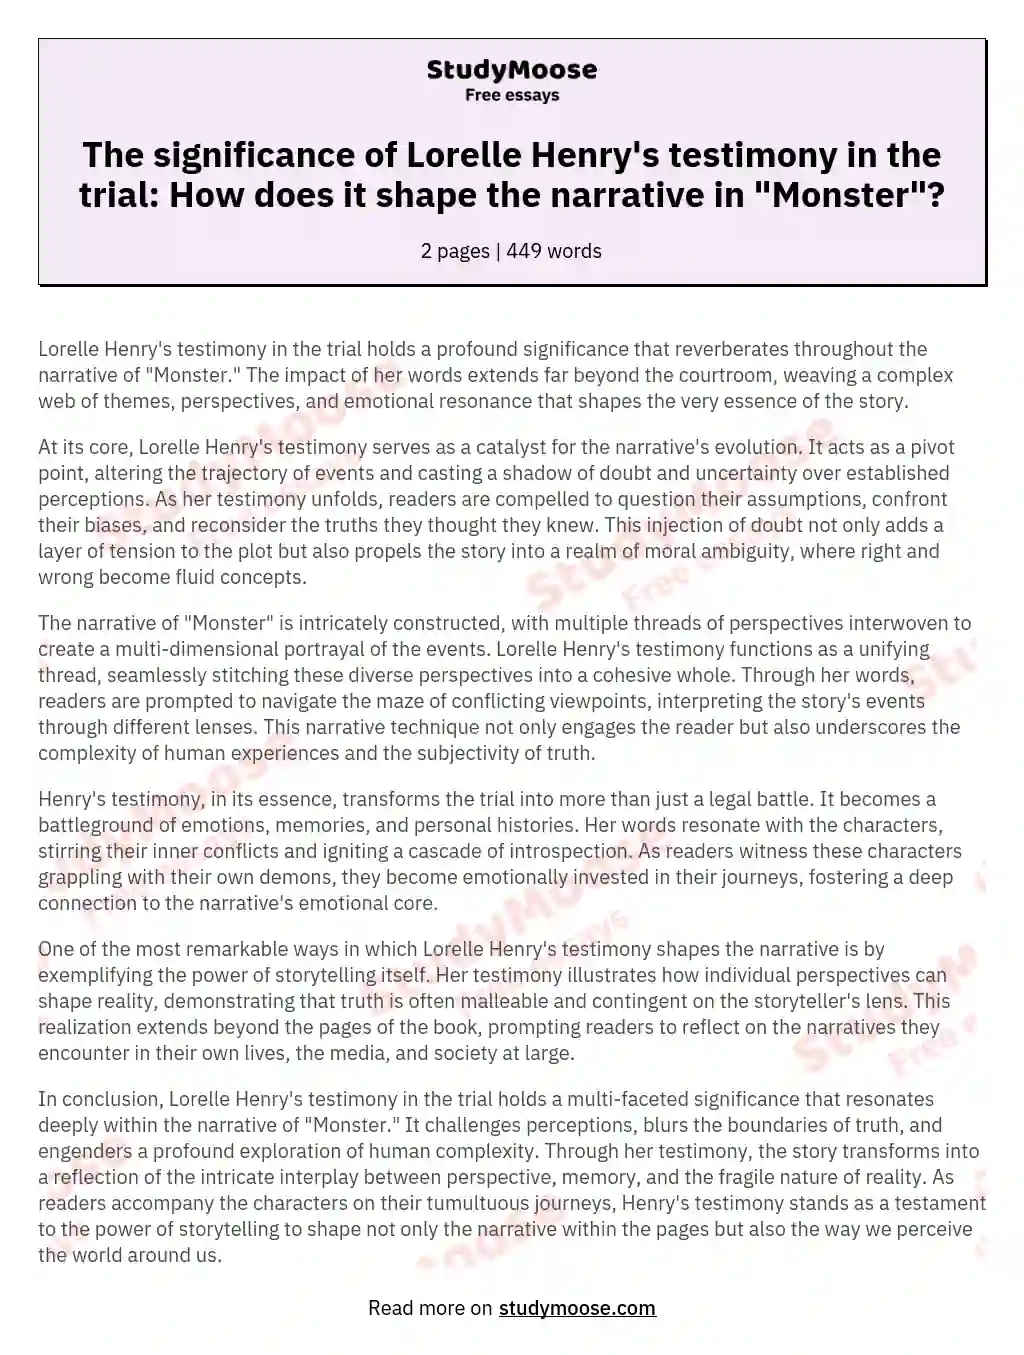 The significance of Lorelle Henry's testimony in the trial: How does it shape the narrative in "Monster"? essay